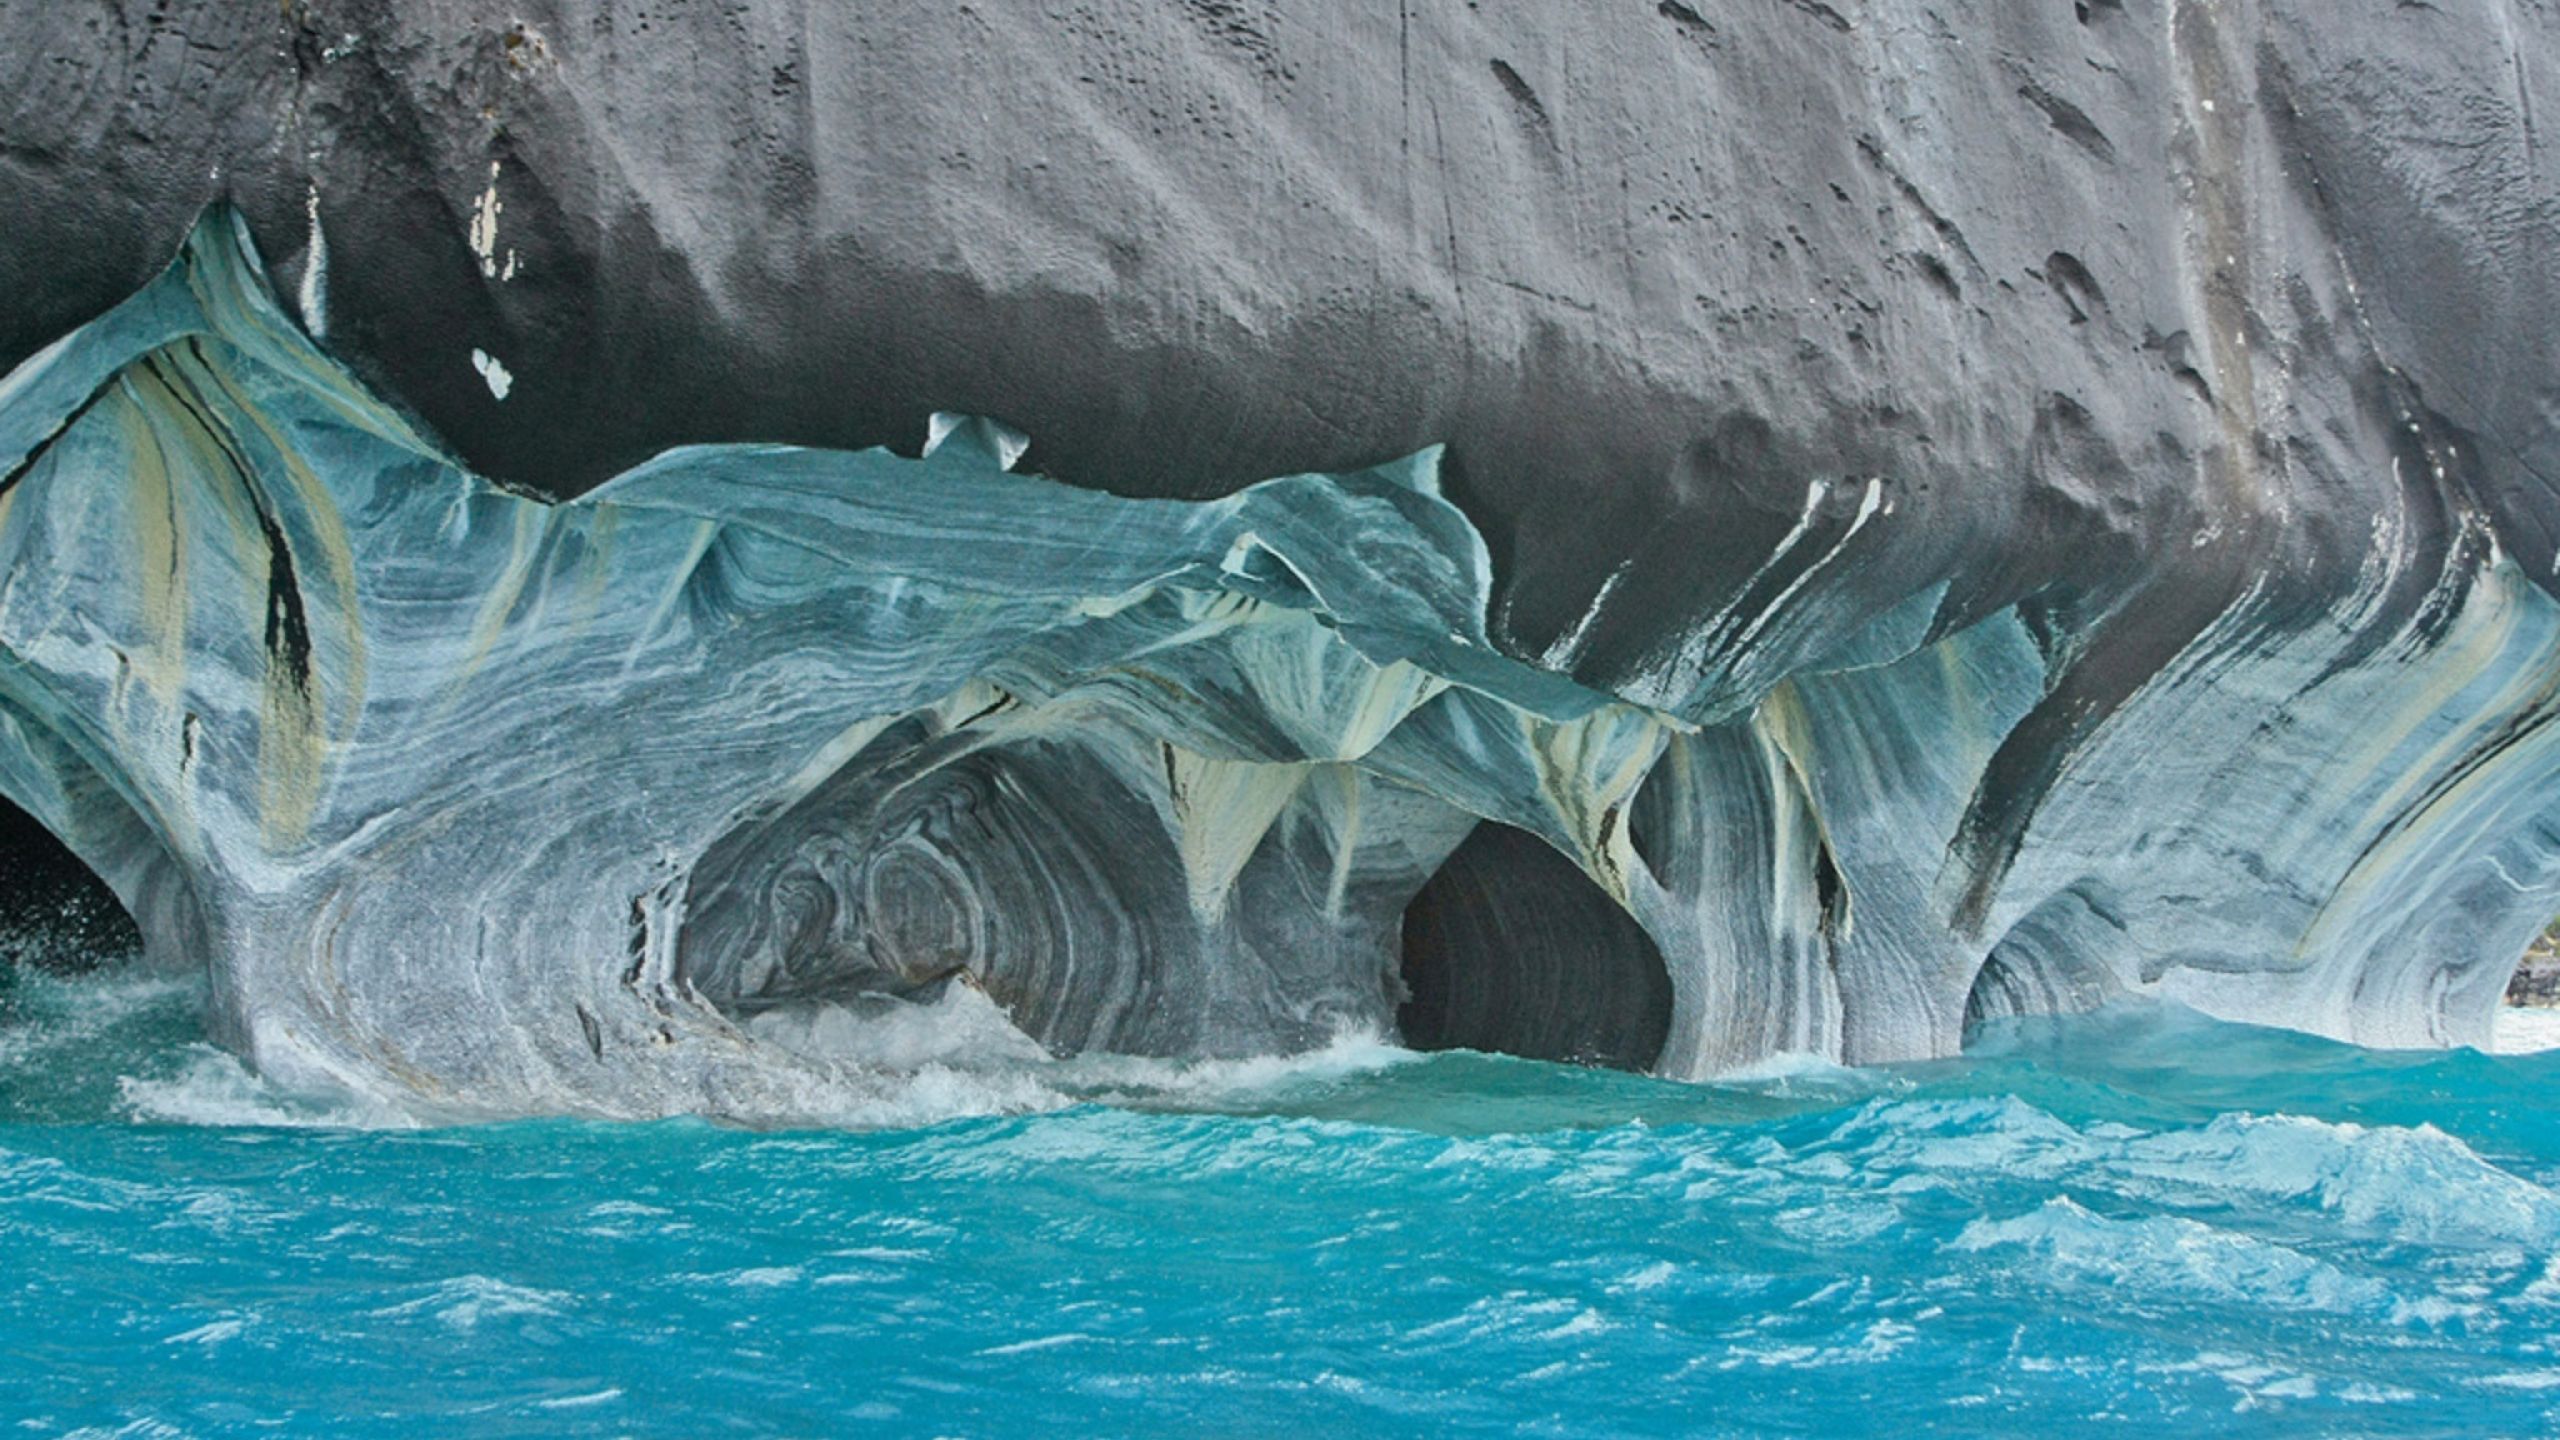 marble caves chile chico, chile, caves 1440P Resolution